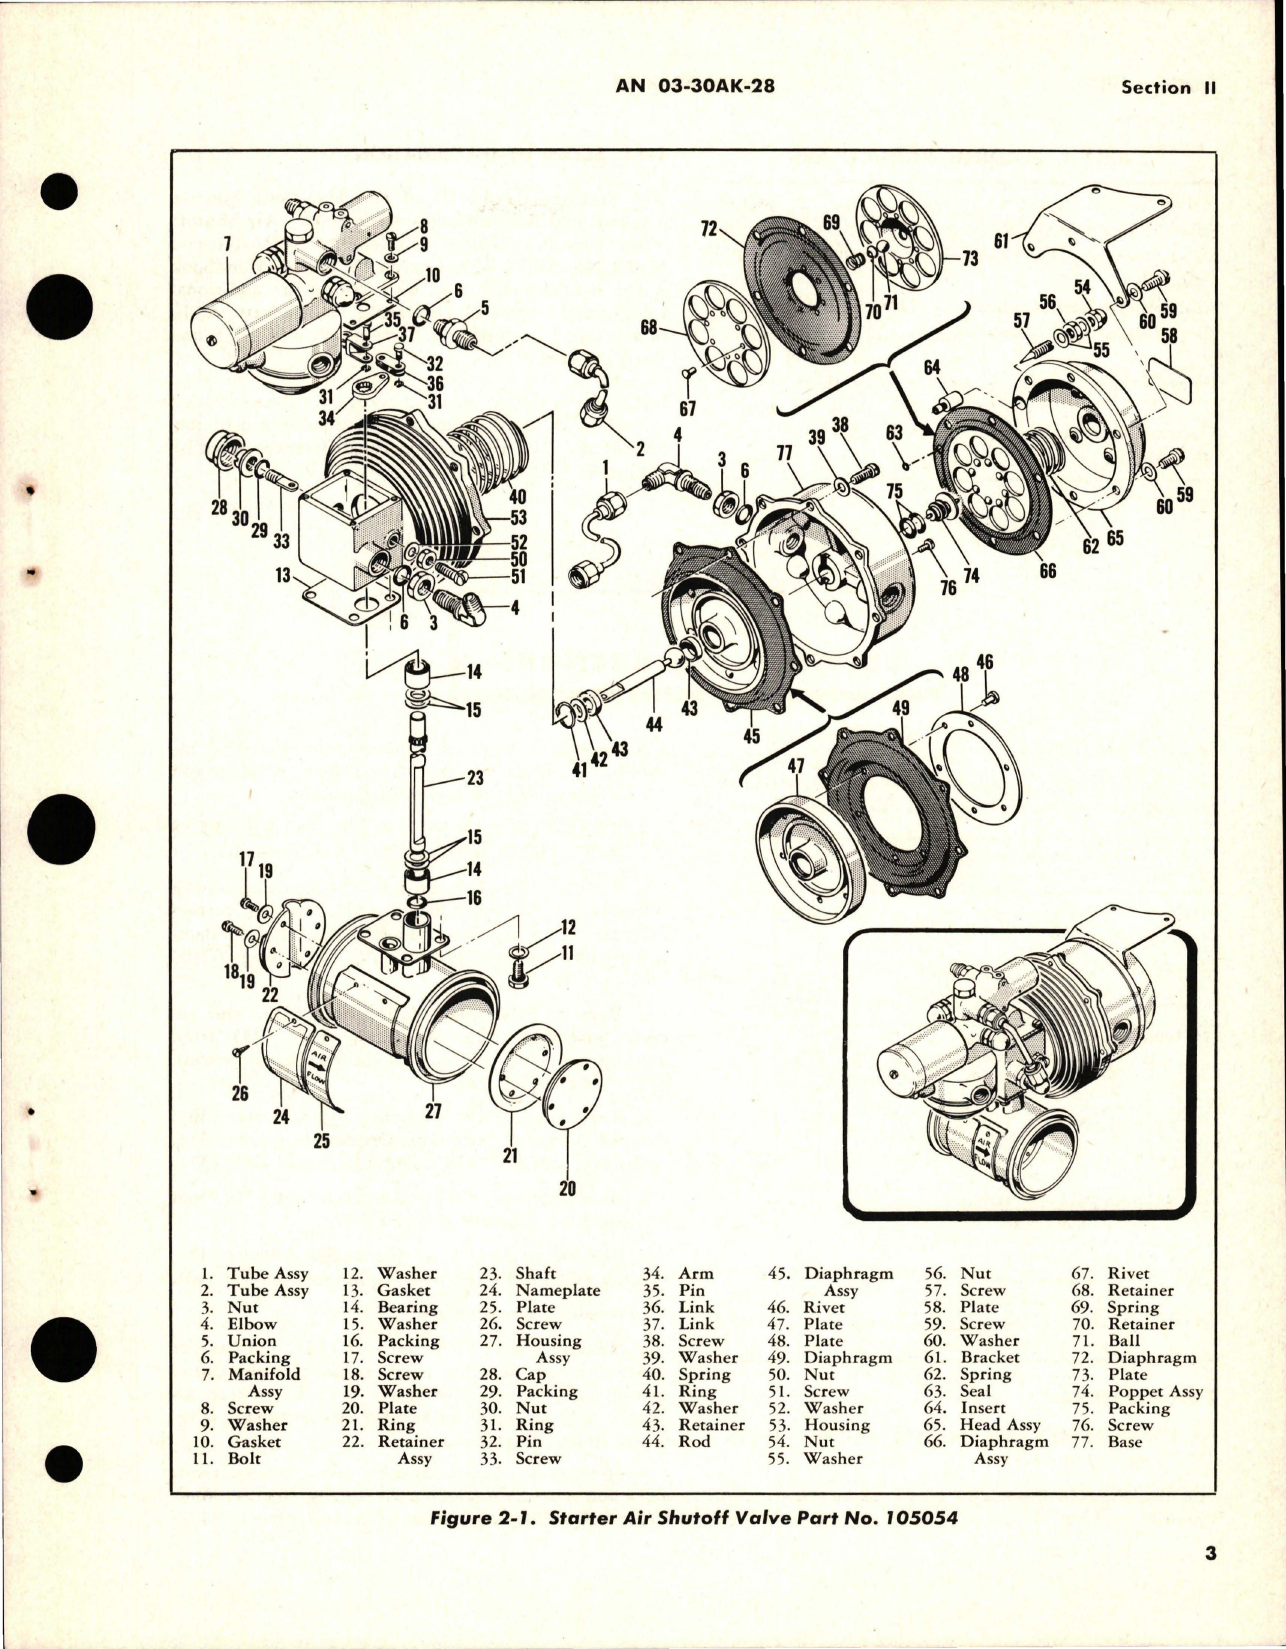 Sample page 7 from AirCorps Library document: Overhaul Instructions for Starter Air Shutoff Valve - Part 105054 - Model SVPA-1 